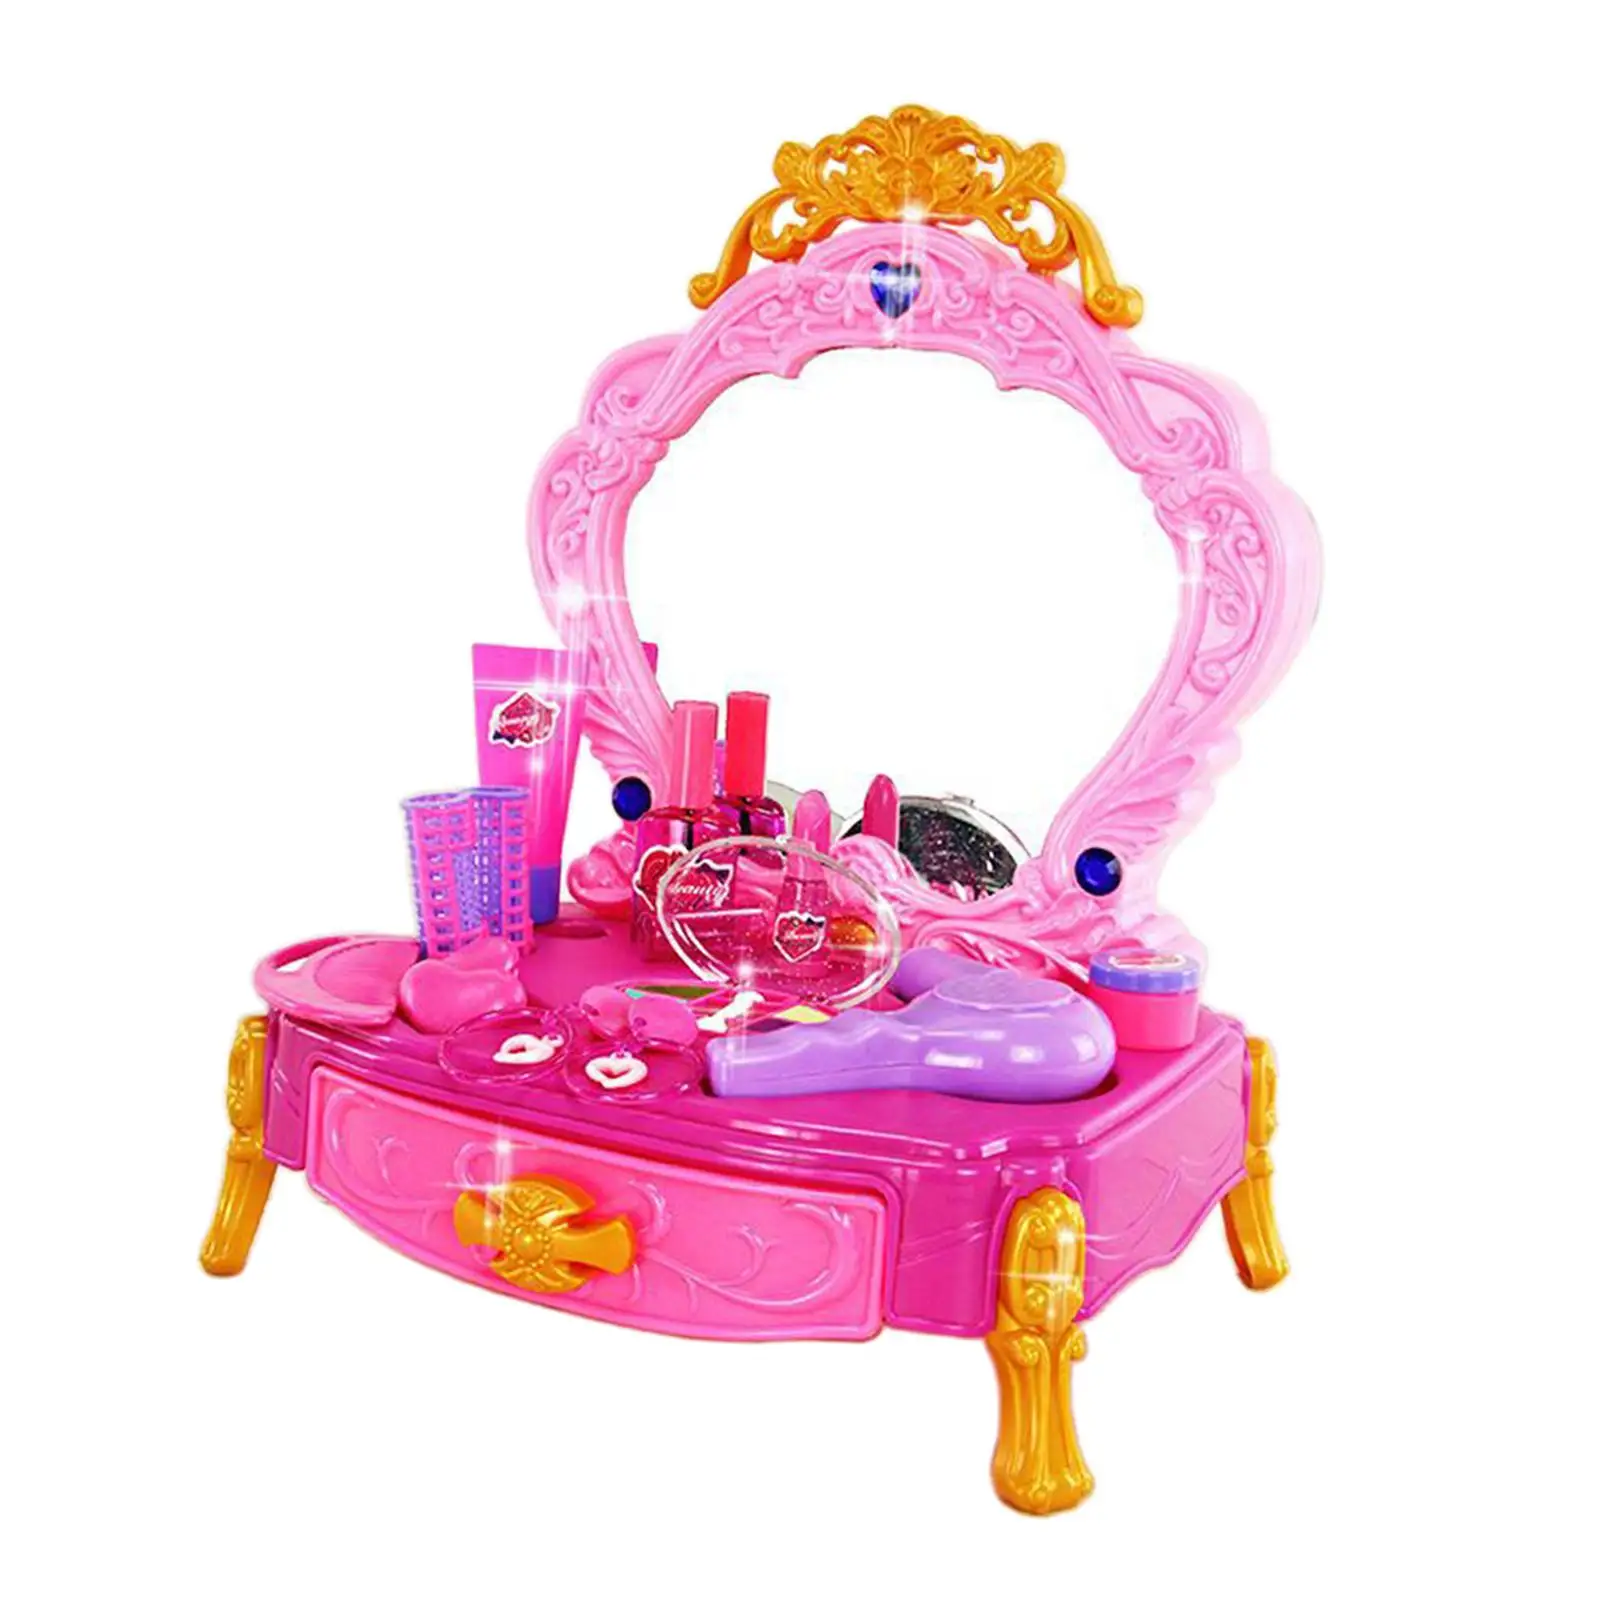 Kids Makeup Music Role Play mirror Toy for Kids Holiday Gifts